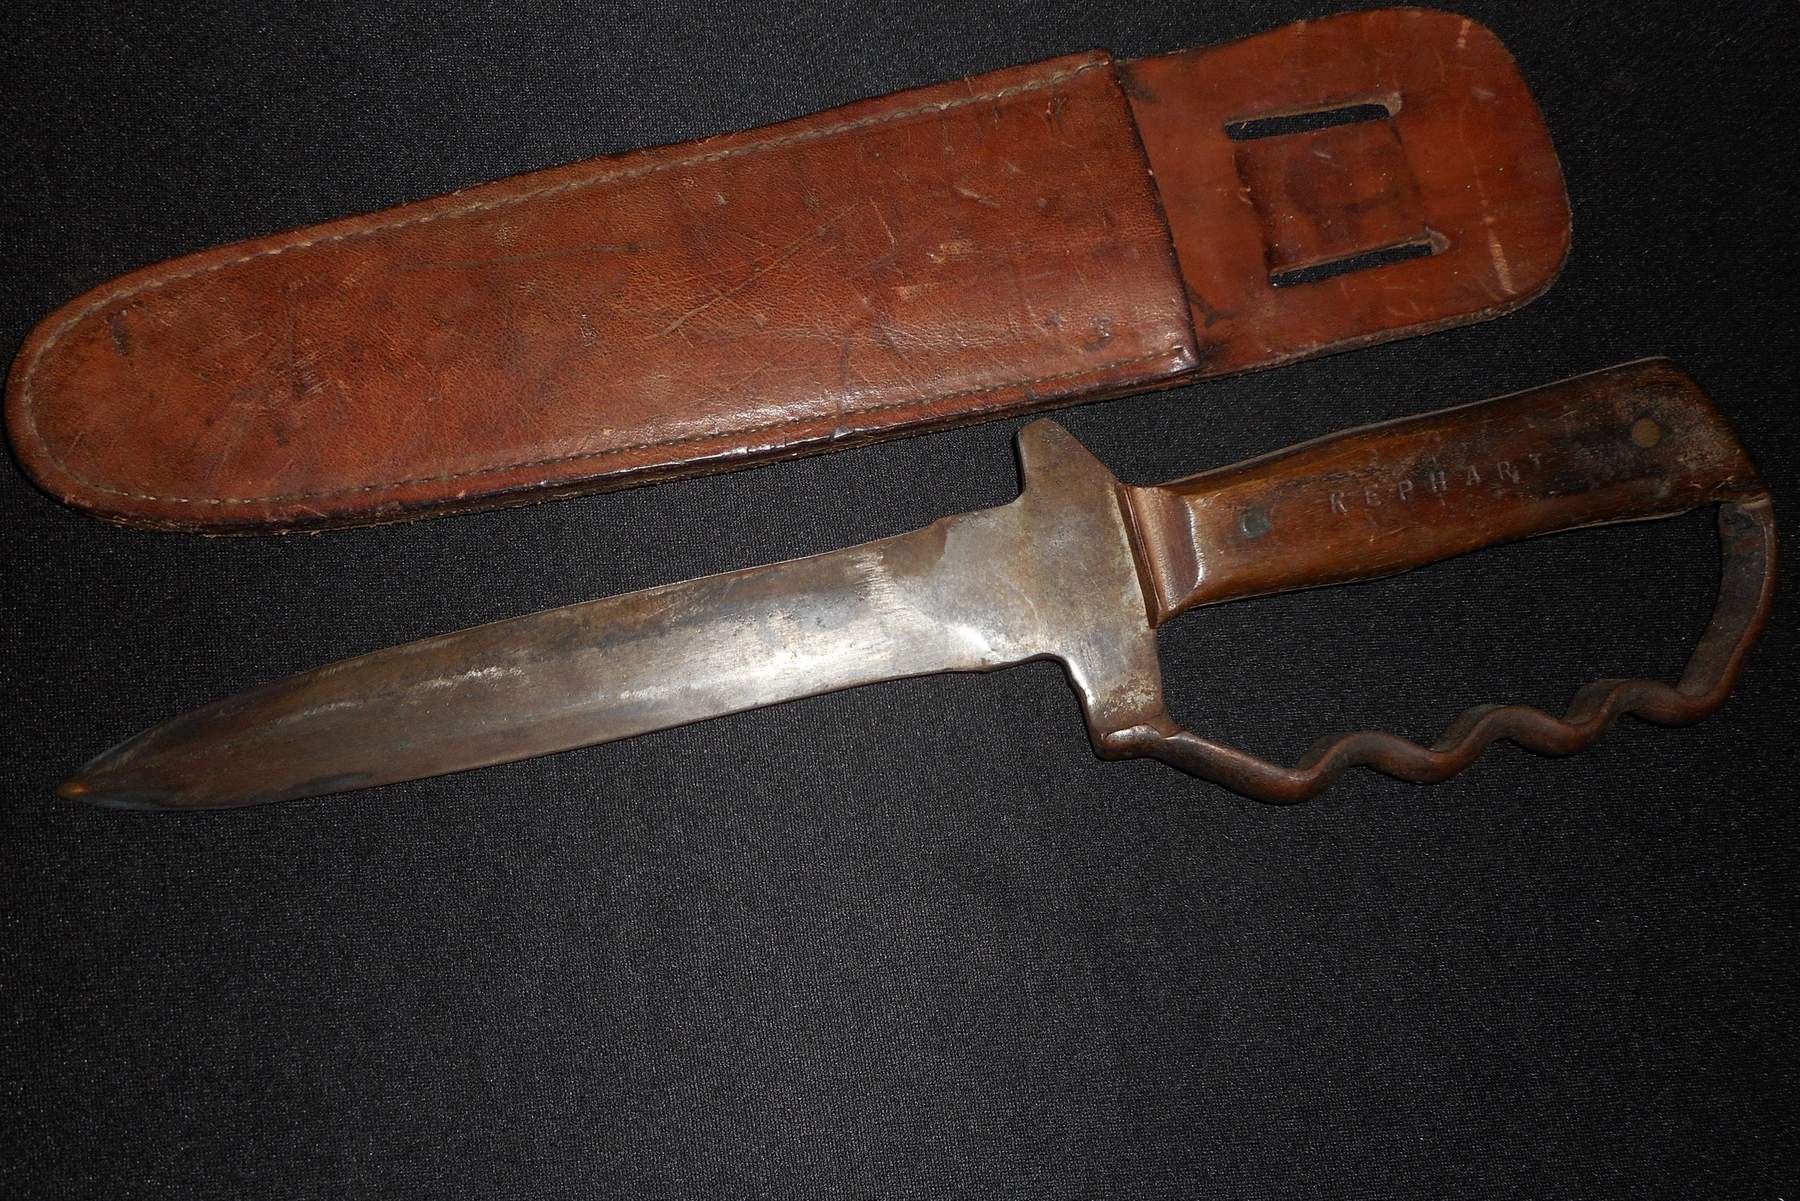 Rare Us Ww2 Kephart Theater Knuckle Knife Homefrontcombat Collection